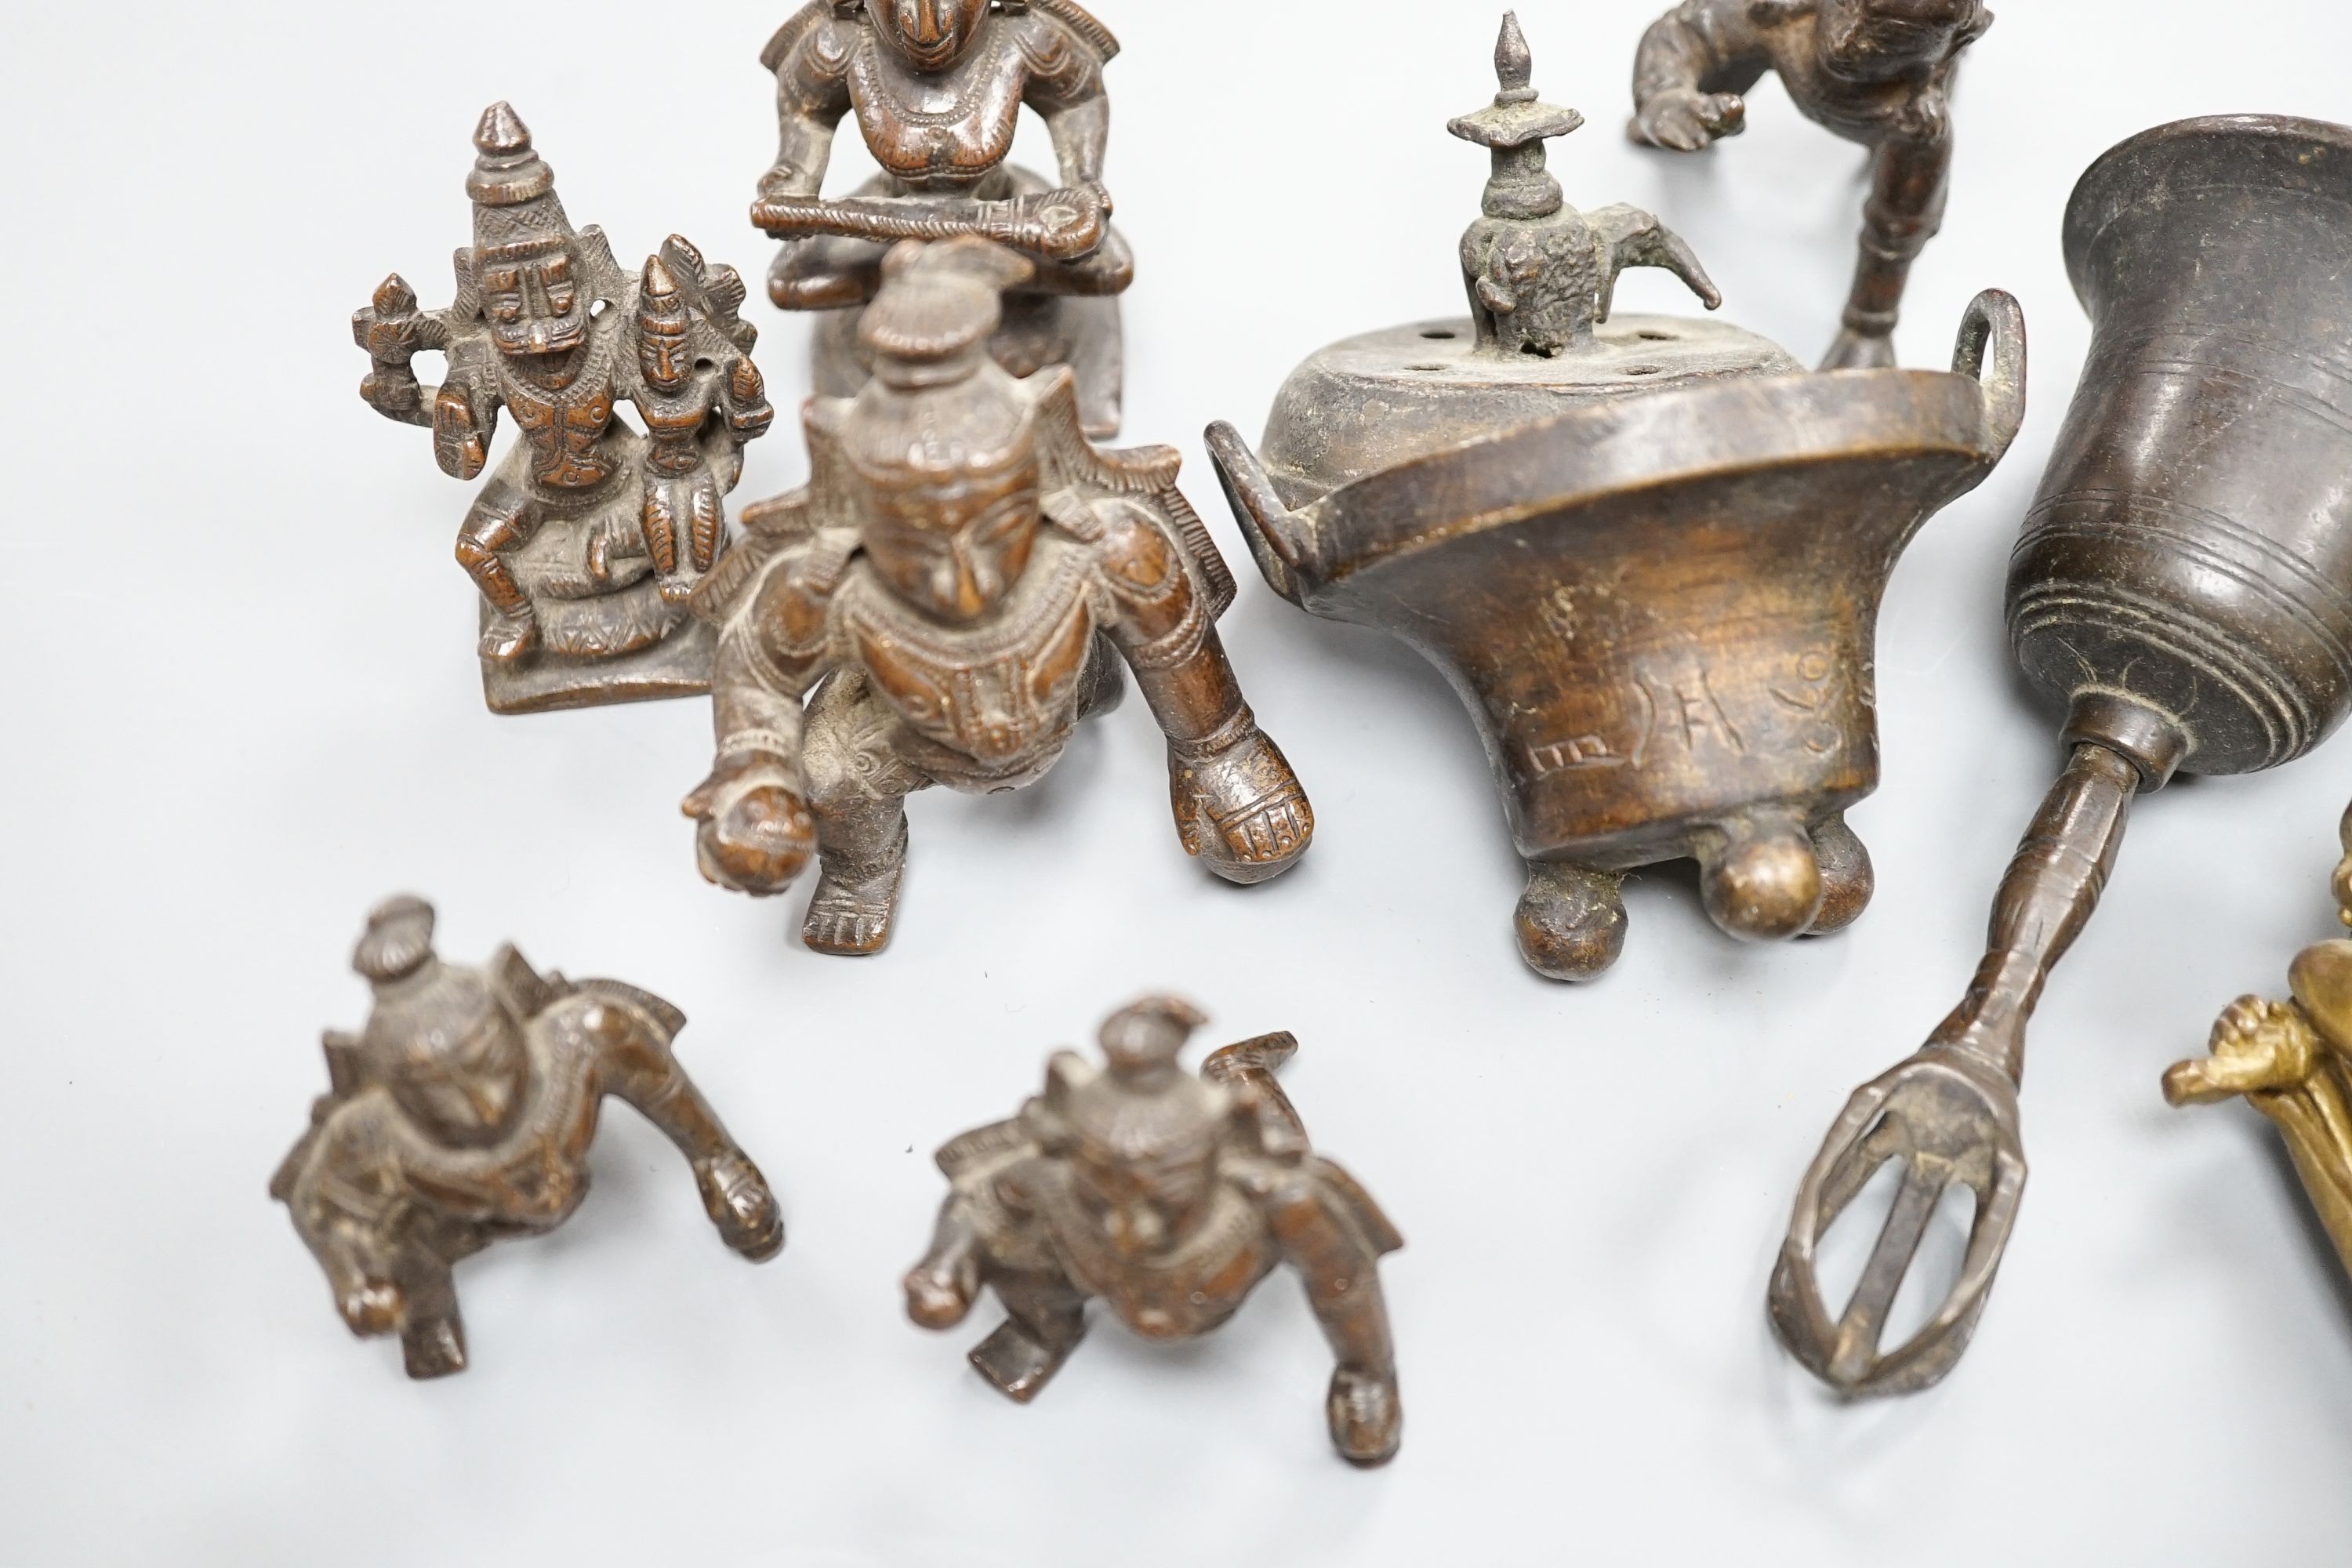 A Chinese gilt copper figure, a Chinese Dog of Fo, a bell, a censer, six Indian bronze figures and a scroll box